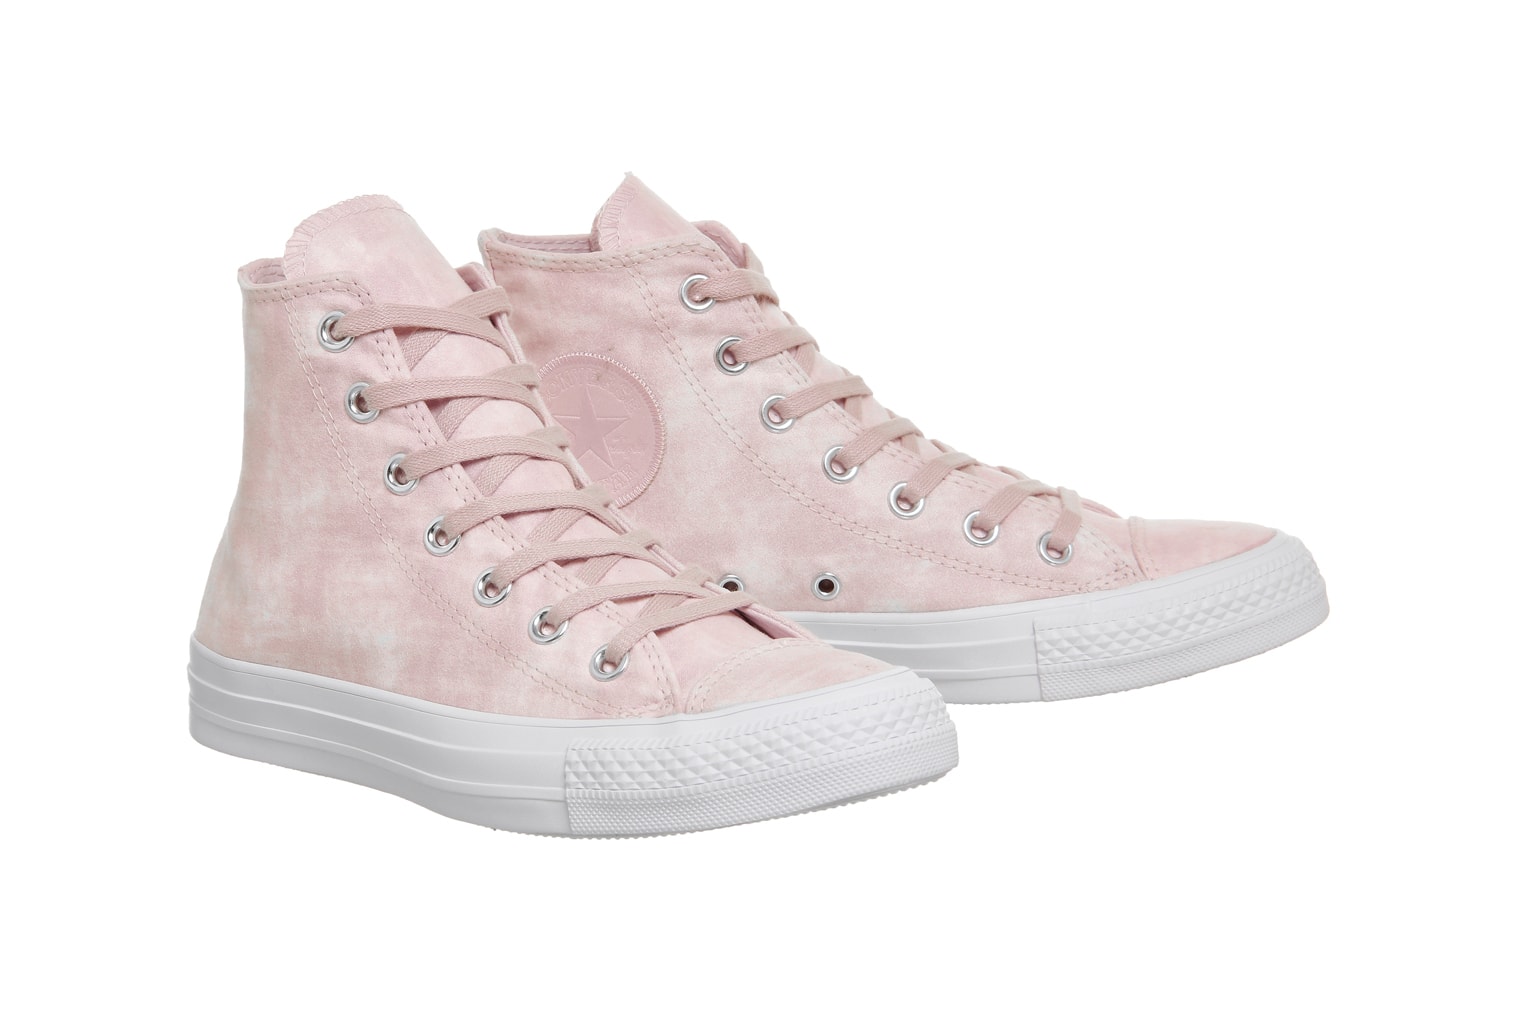 Converse Chuck Taylor All Star Hi Barely Rose White Pastel Pink Blossom Women's Where to Buy OFFICE shoes sneakers trainers